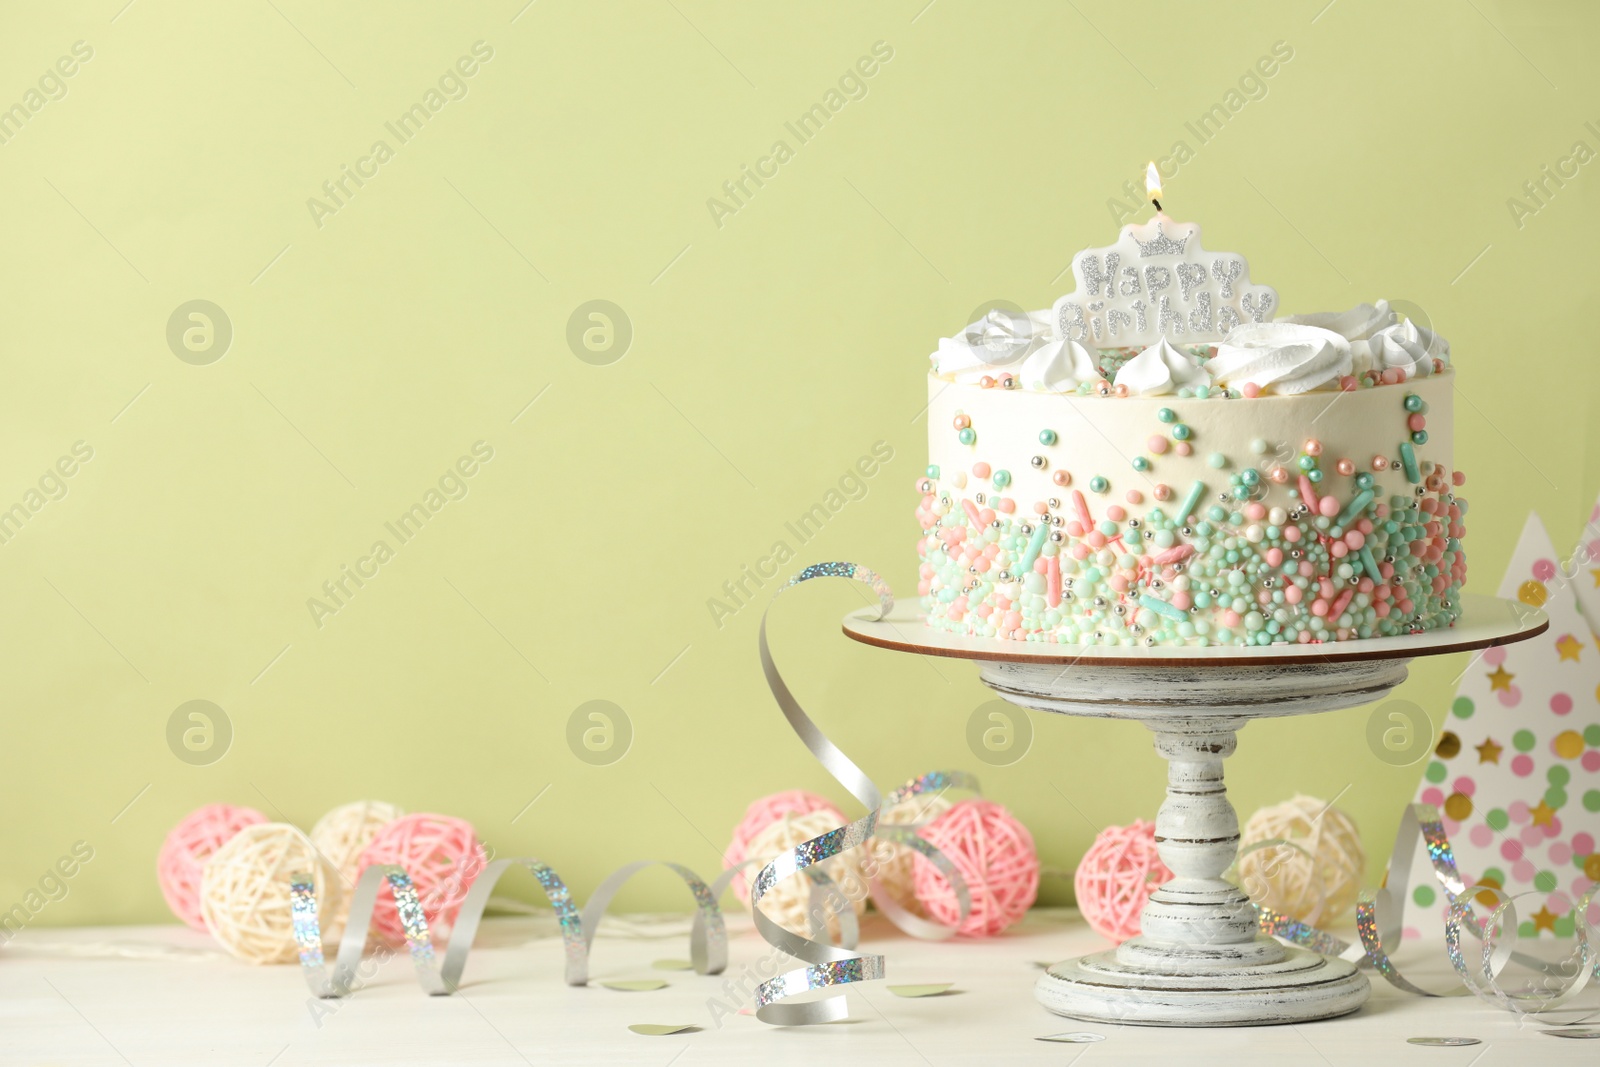 Photo of Delicious birthday cake and party decor on white wooden table against light background, space for text